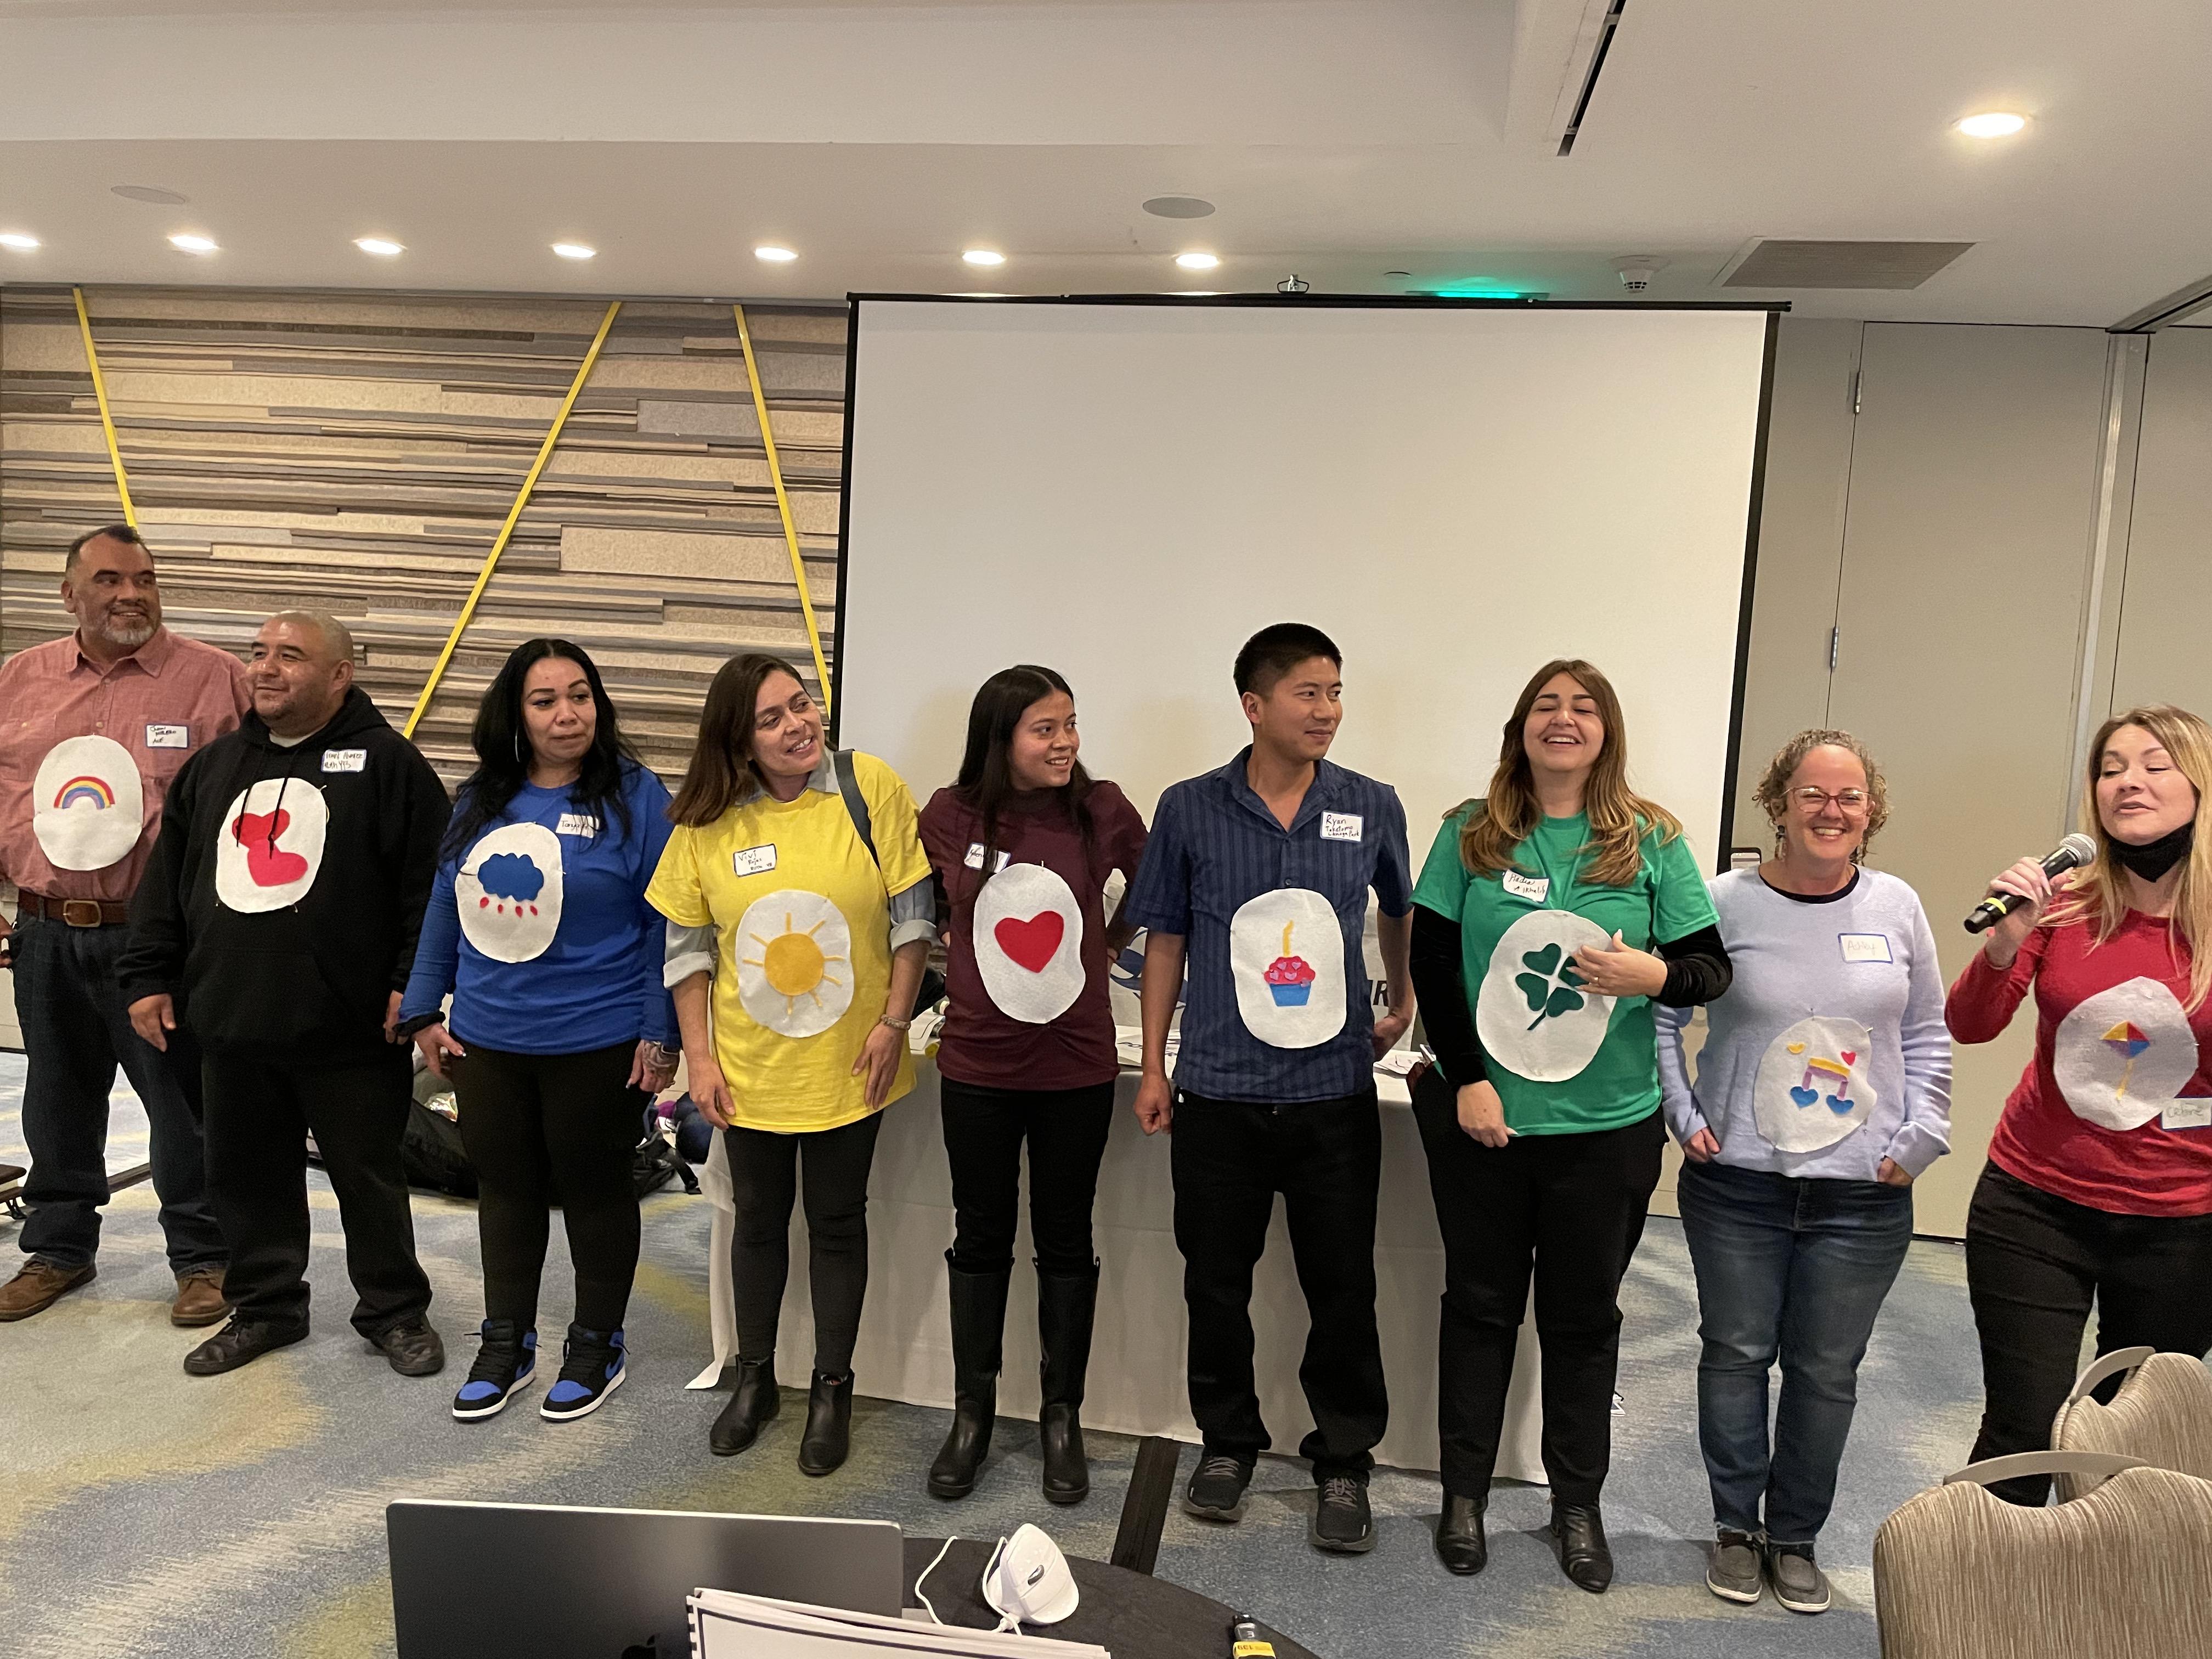 RUTH YouthBuild staff dressed as Care Bears